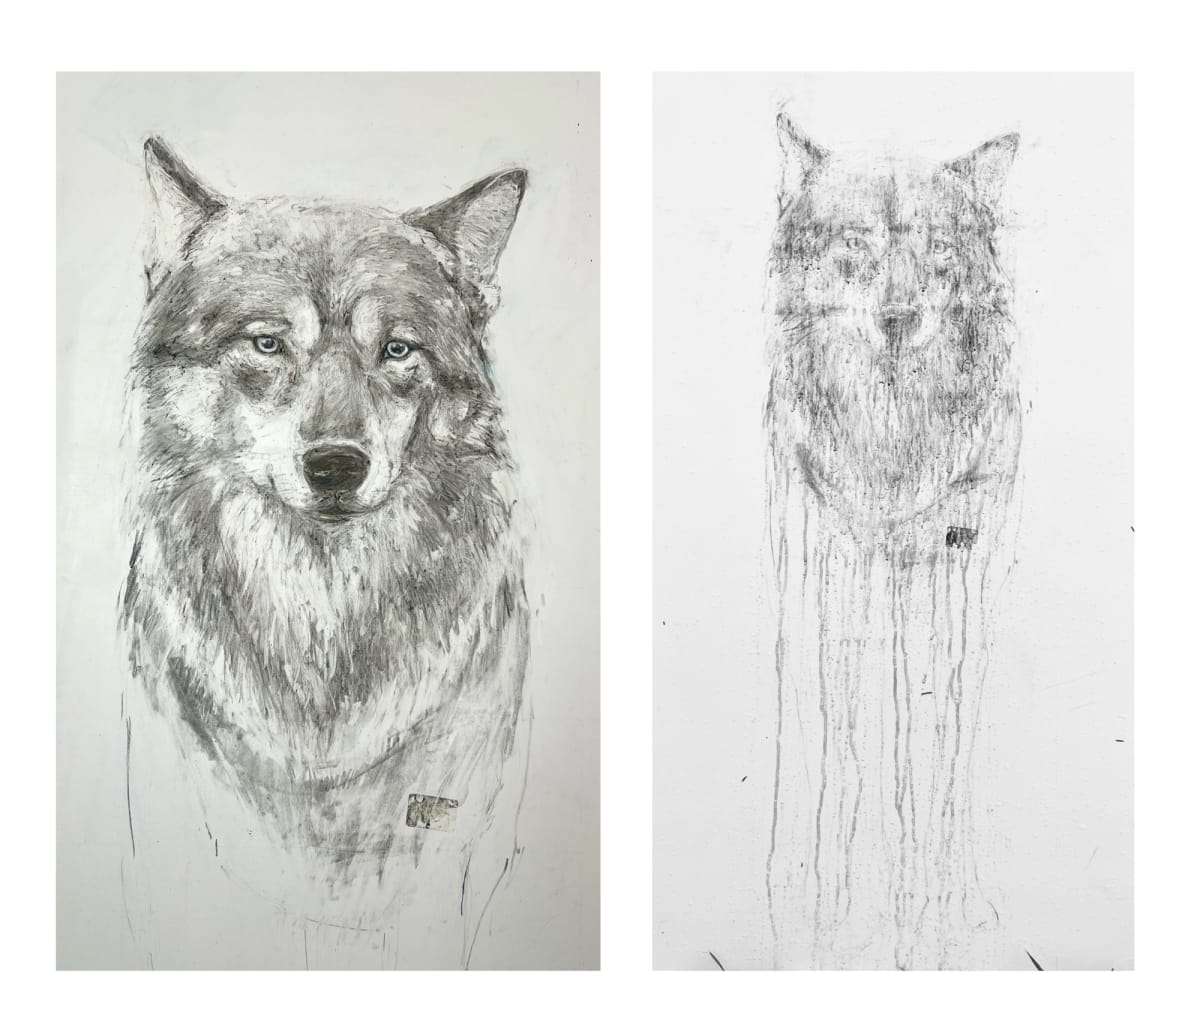 Vanishing Gray Wolf  Image: Vanishing Gray Wolf drawn with foraged wildfire charcoal and soil mixed with Saugatuck River water.  It was left outside to wash away in a rainstorm.